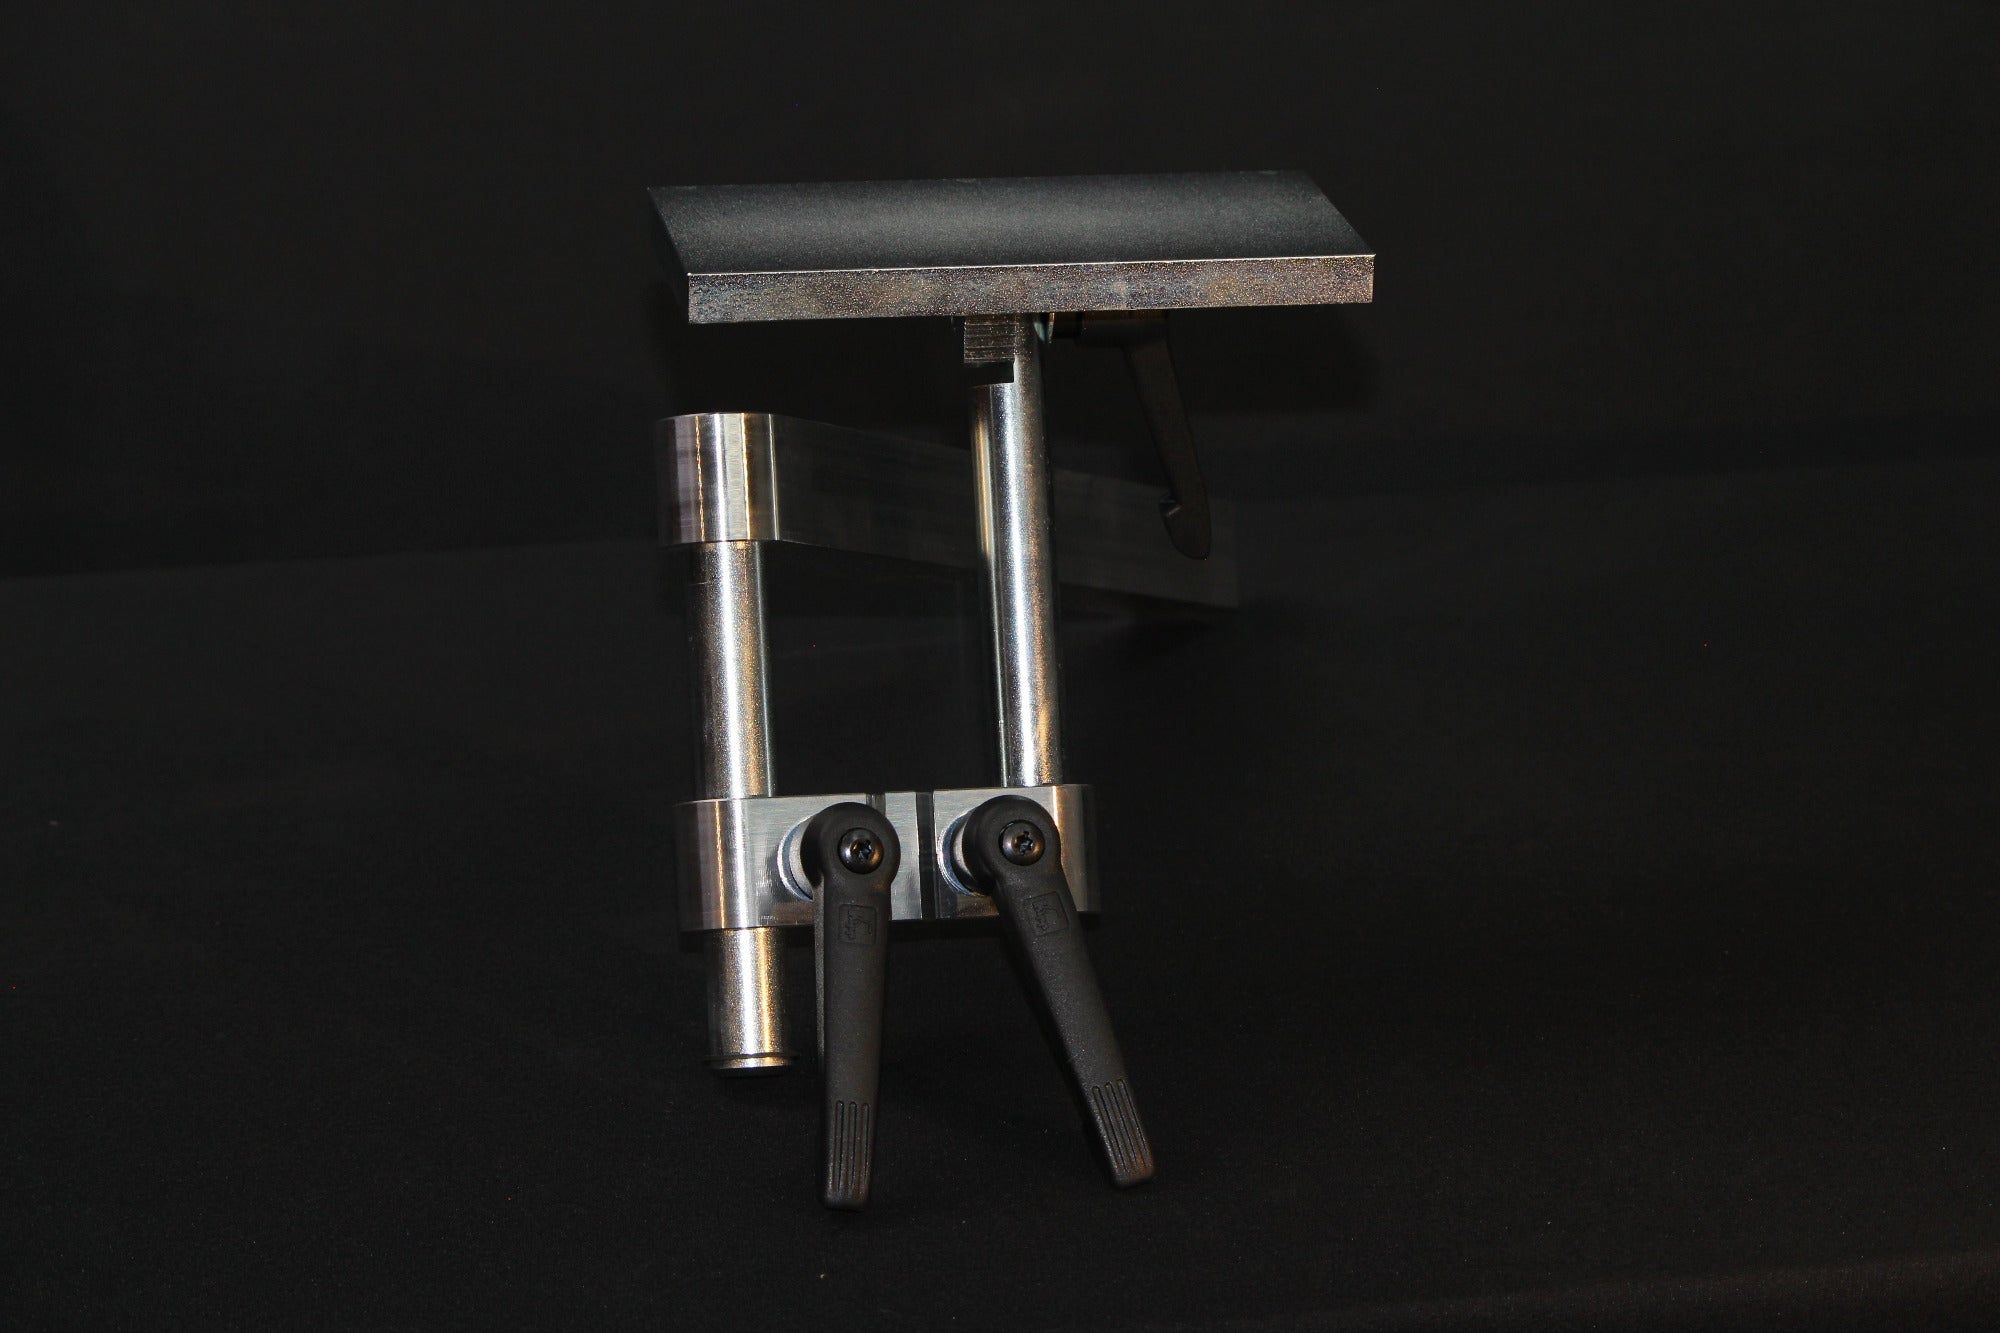 84 Engineering Universal Tool Rest - highly adjustable in all axes & compatable with our Shop Mate 48